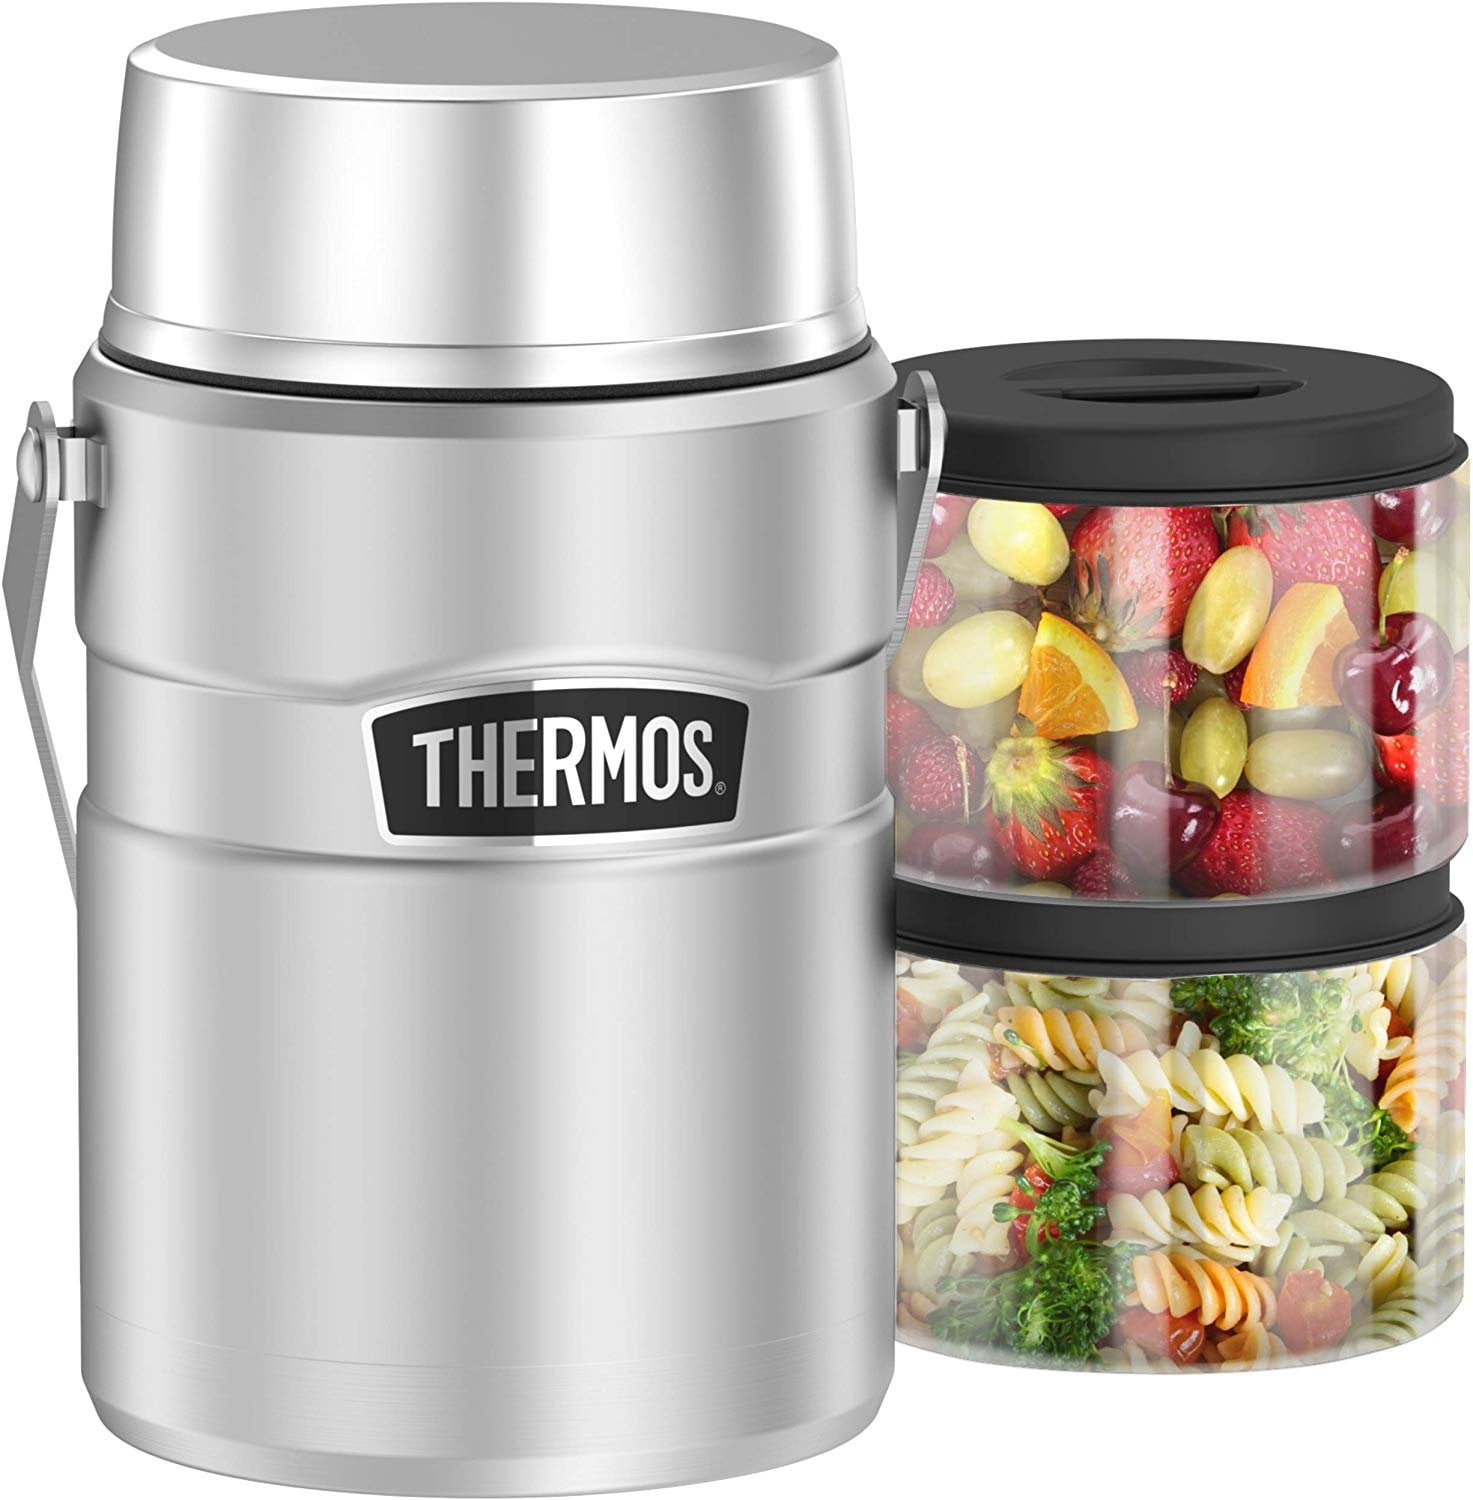 $16.99-19.99 Thermos For Hot Food - 17OZ Insulated Food Container